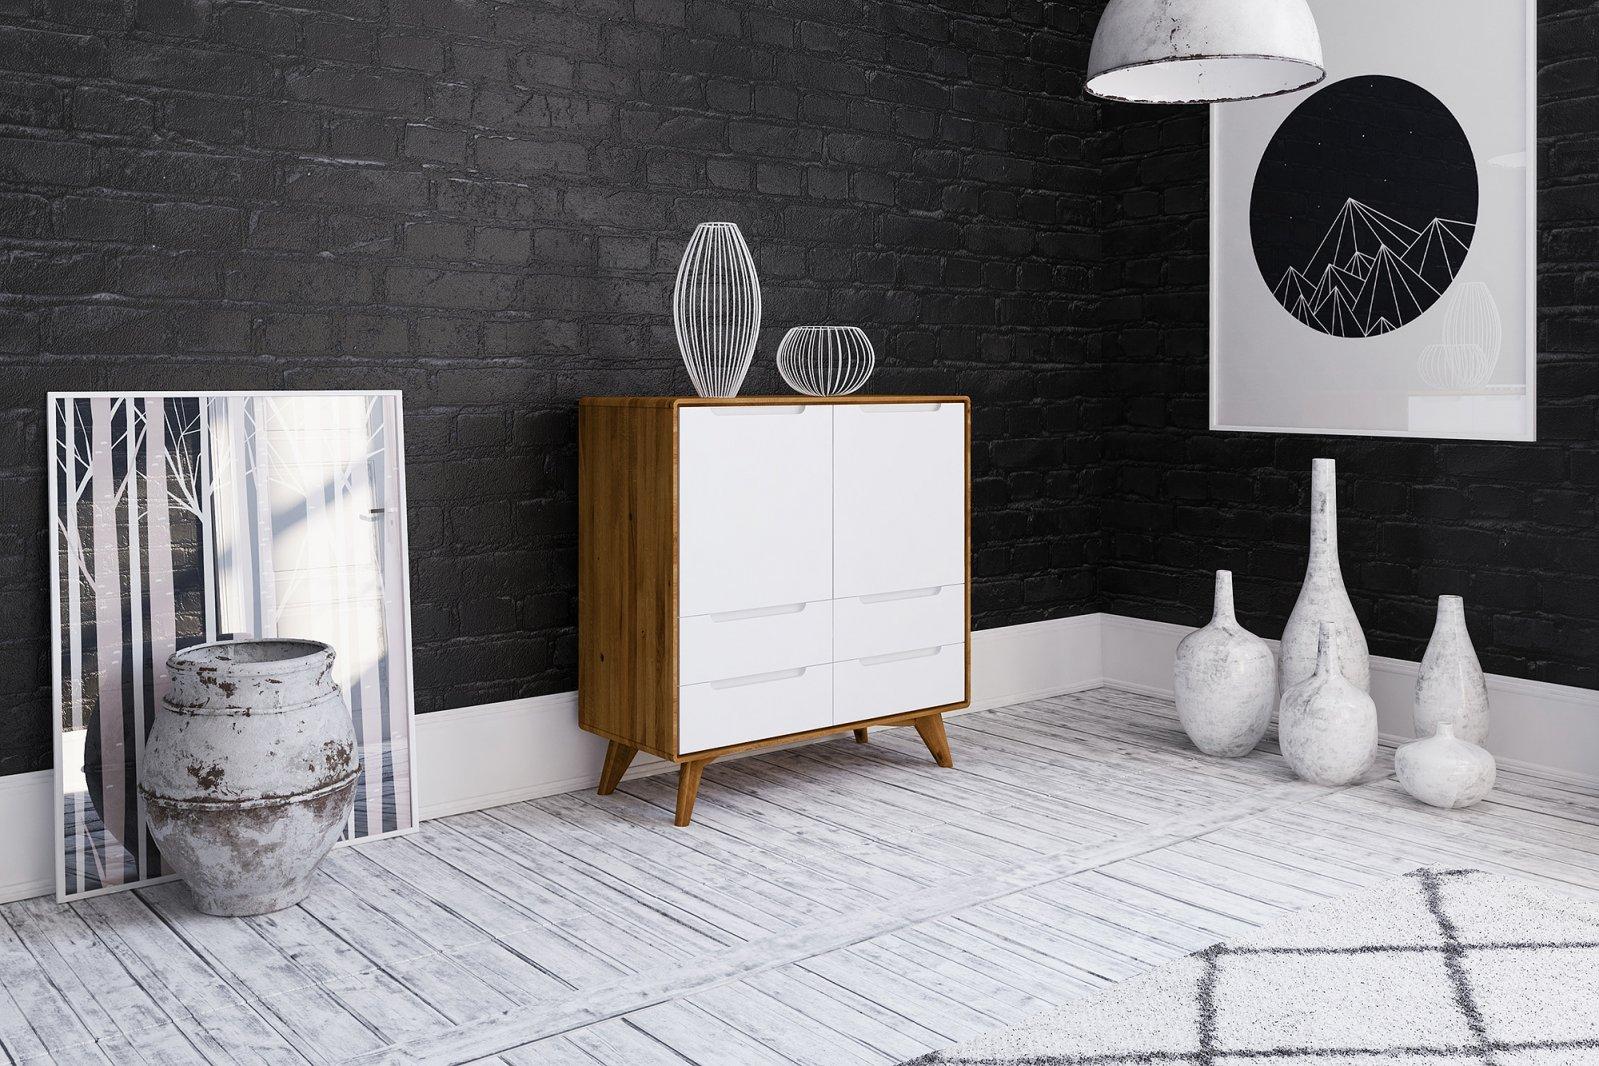 Chest of drawers high BIANCO